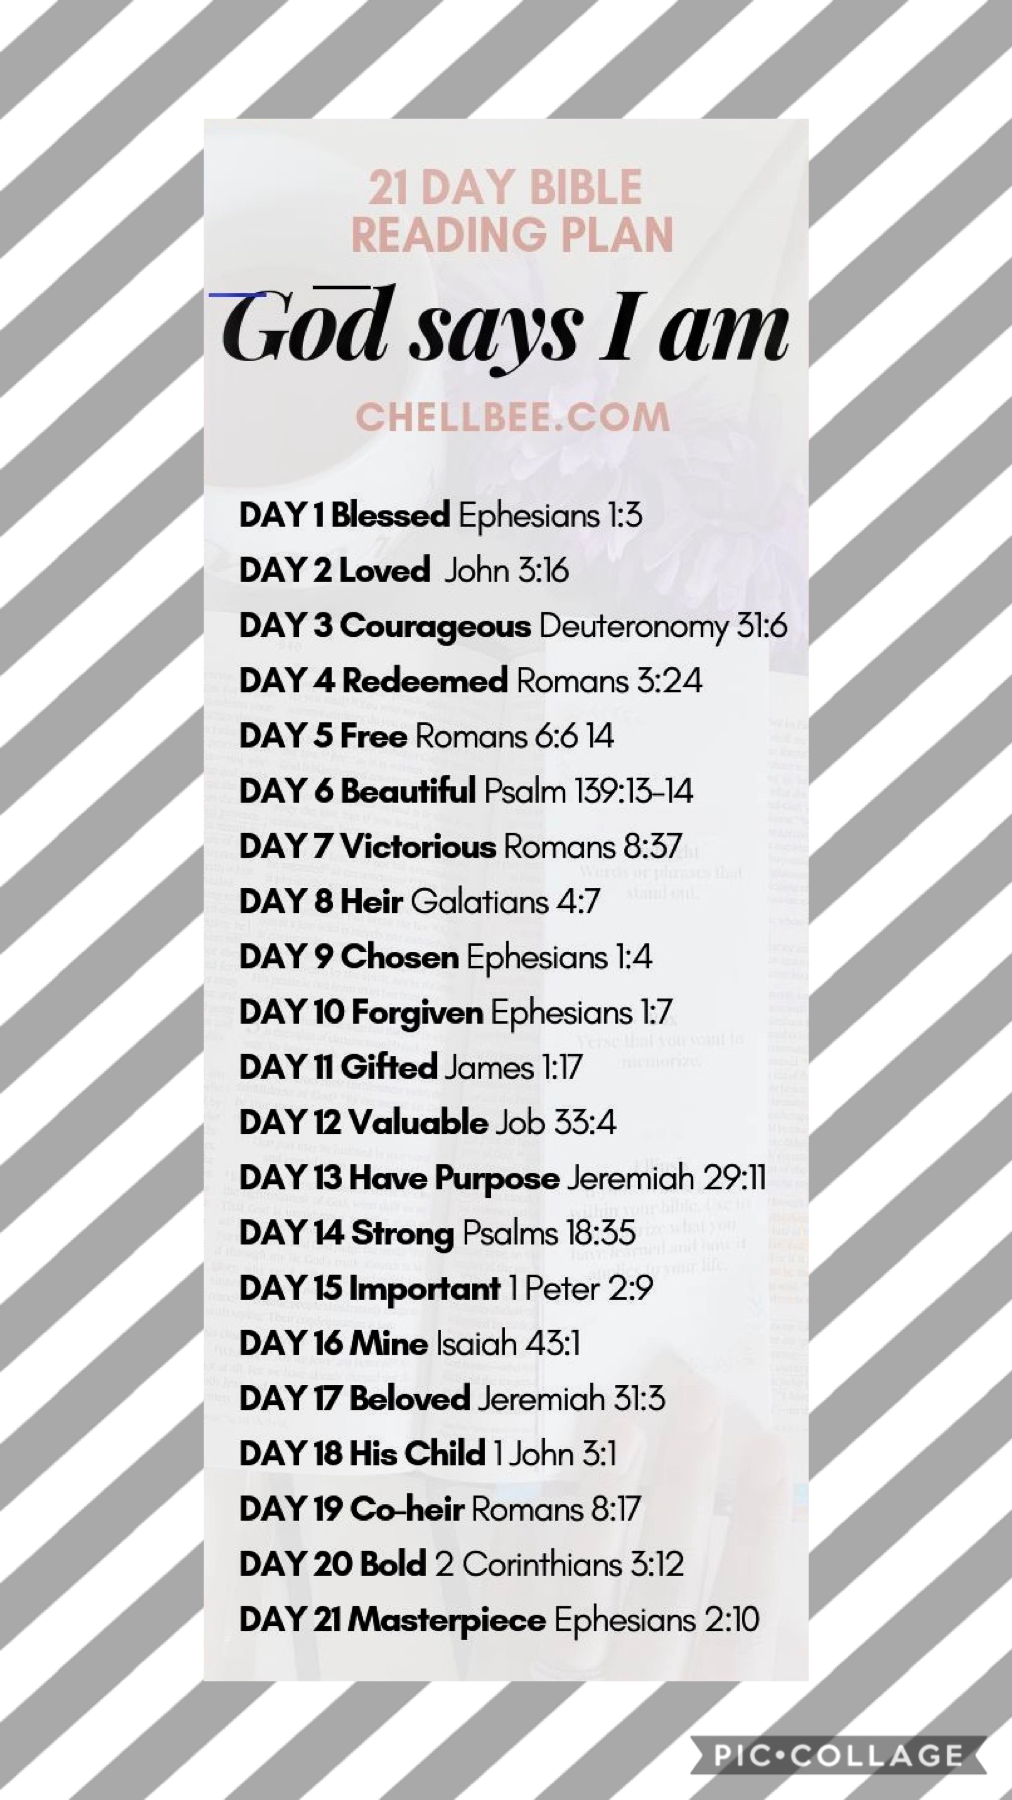 This is an awesome reading plan!! Hope y’all love it too❤️❤️